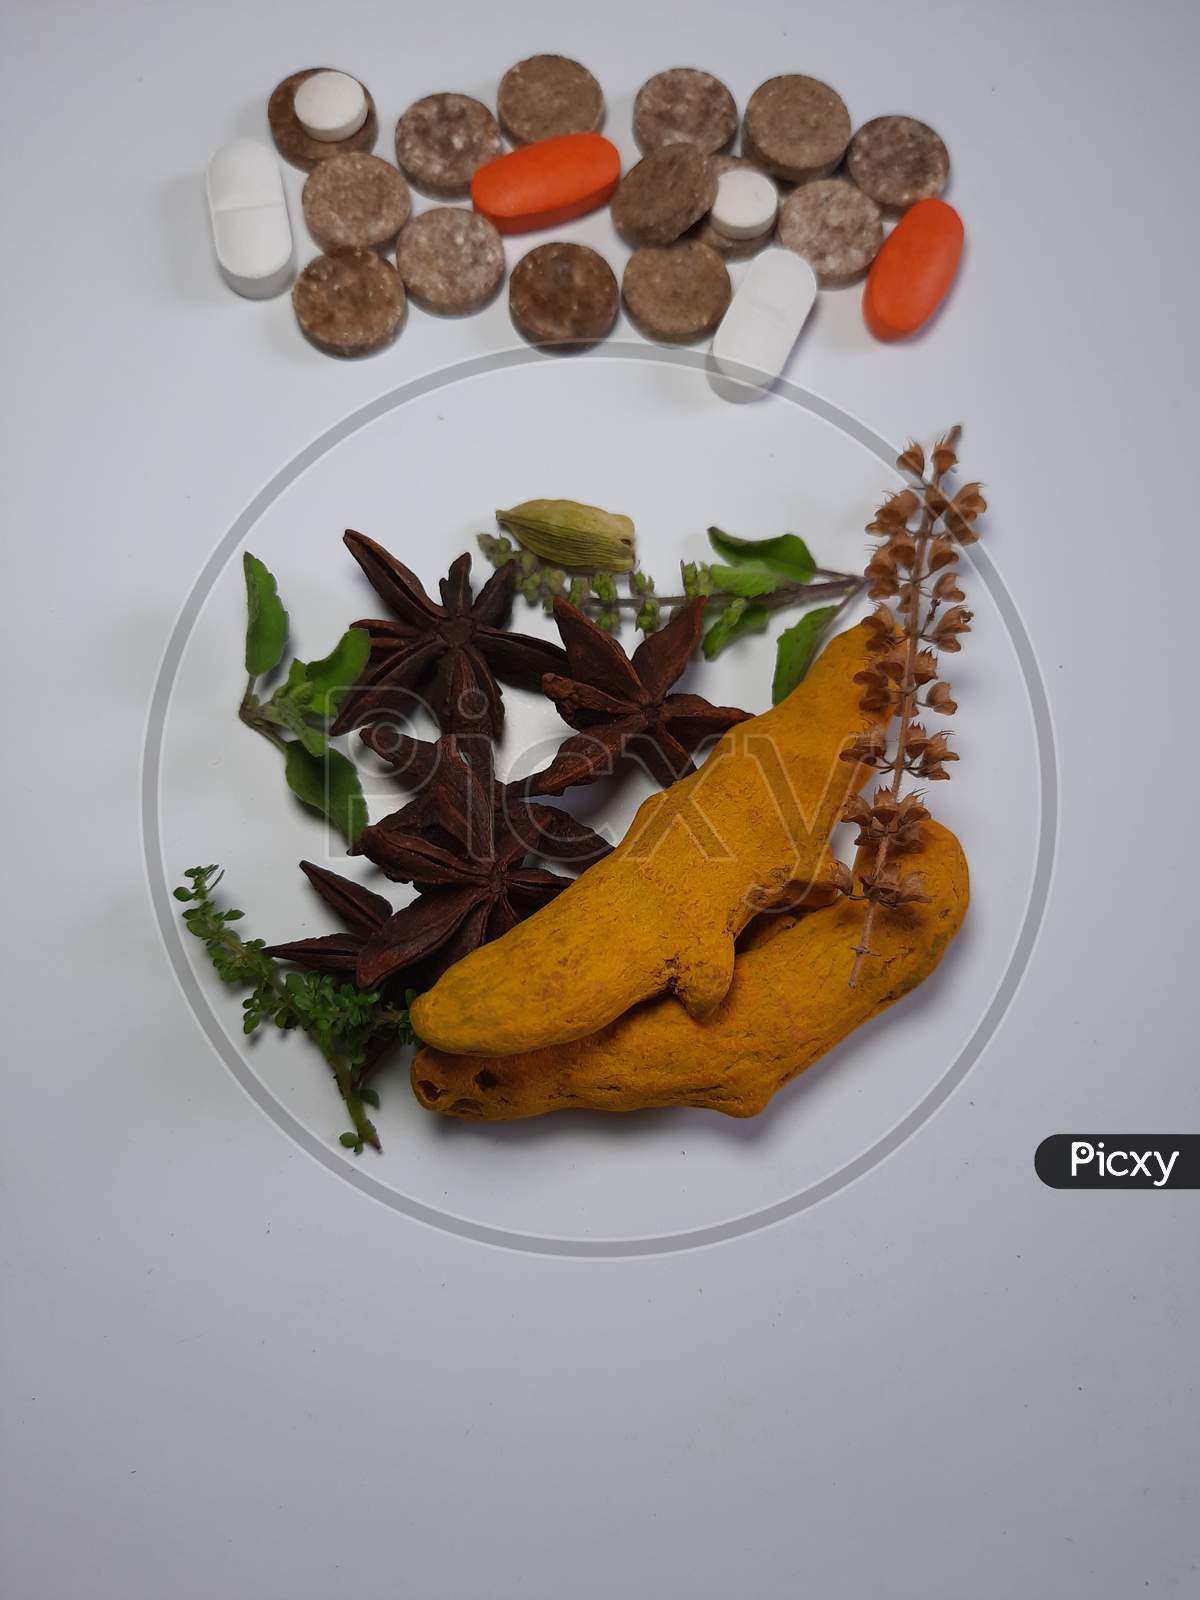 Herbal Medicine Vs Brown Pills Isolated Medicine The Alternative Healthy Car .Leaf ,Medical On White Background Stock .